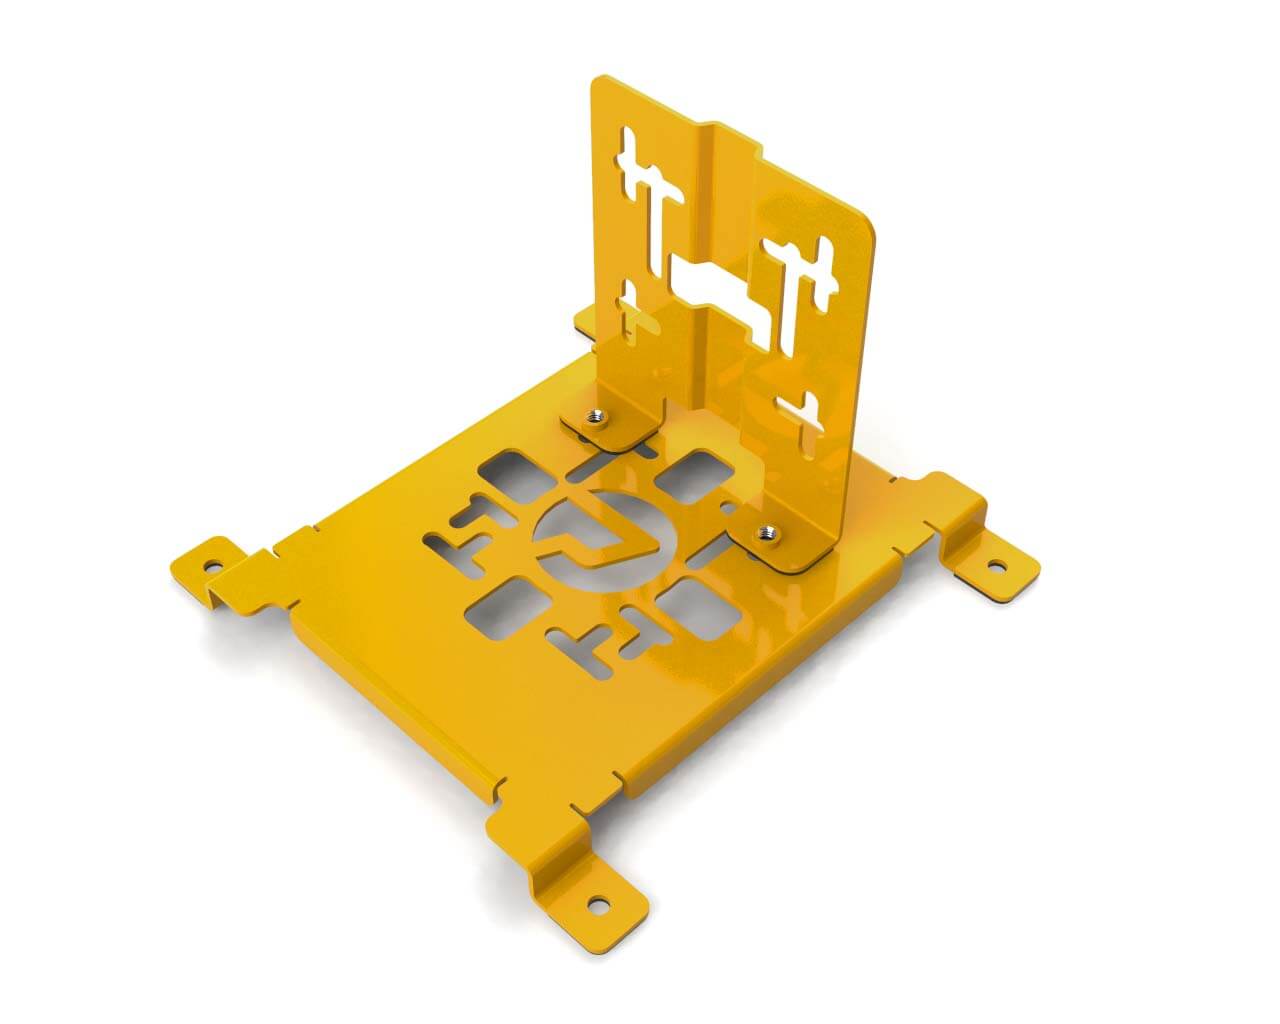 PrimoChill SX Universal Spider Mount Bracket Kit - 140mm Series - PrimoChill - KEEPING IT COOL Yellow